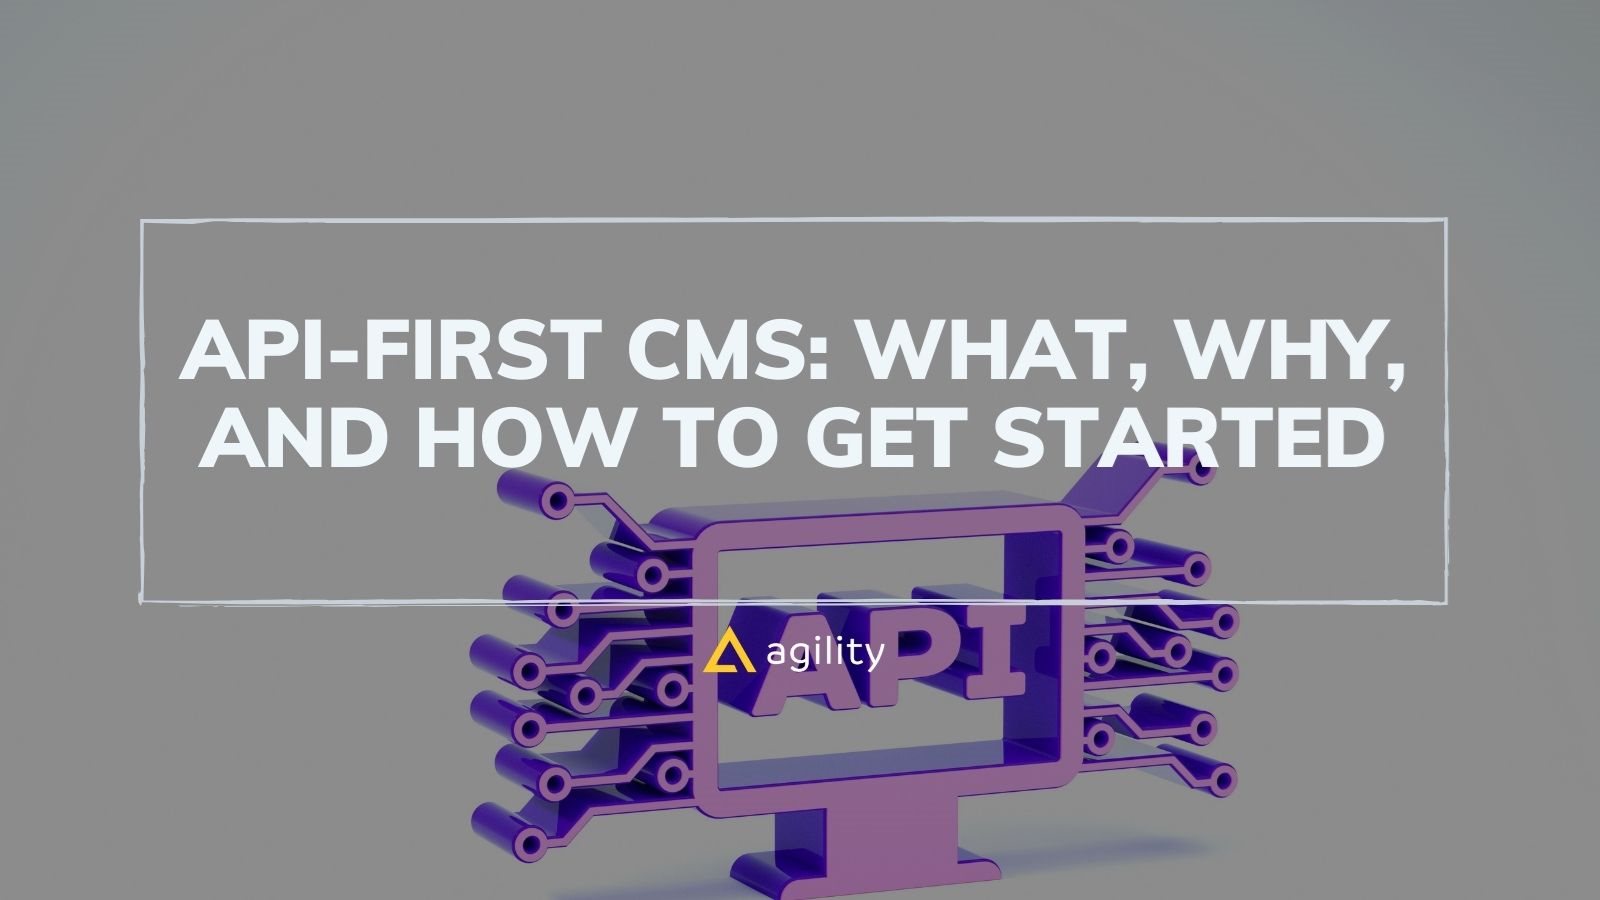 API-first CMS: What, Why, and How to Get Started